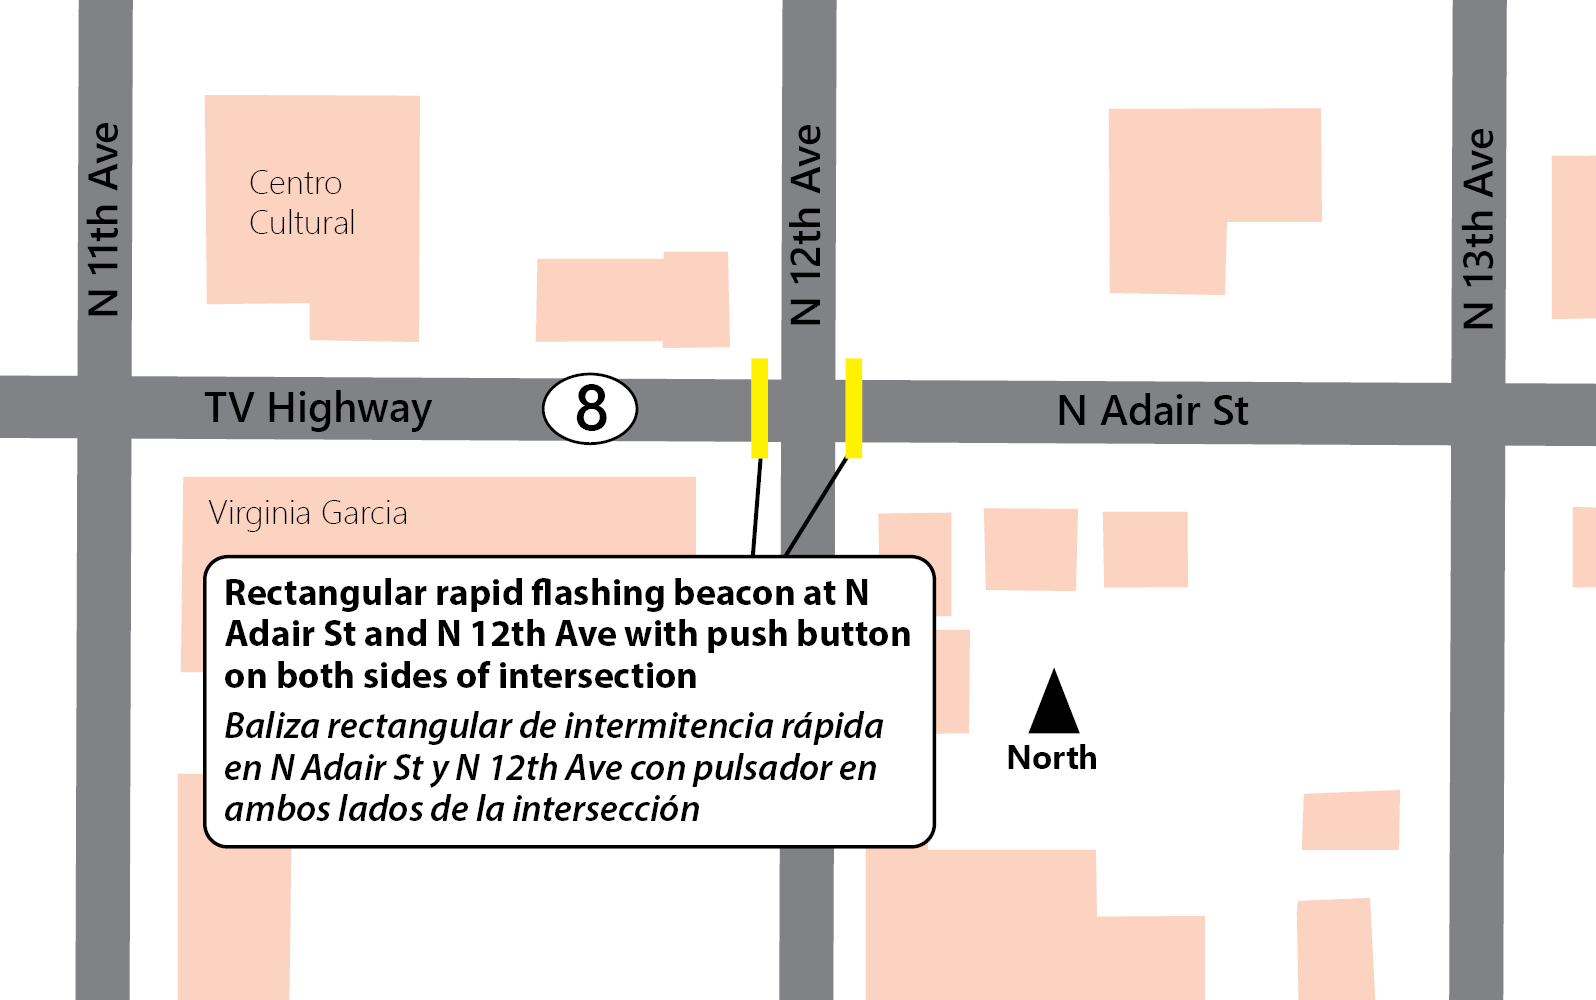 A rapid flashing beacon location shown on a map at North Adair Street (TV Highway) at North 12th Avenue near Virginia Garcia.